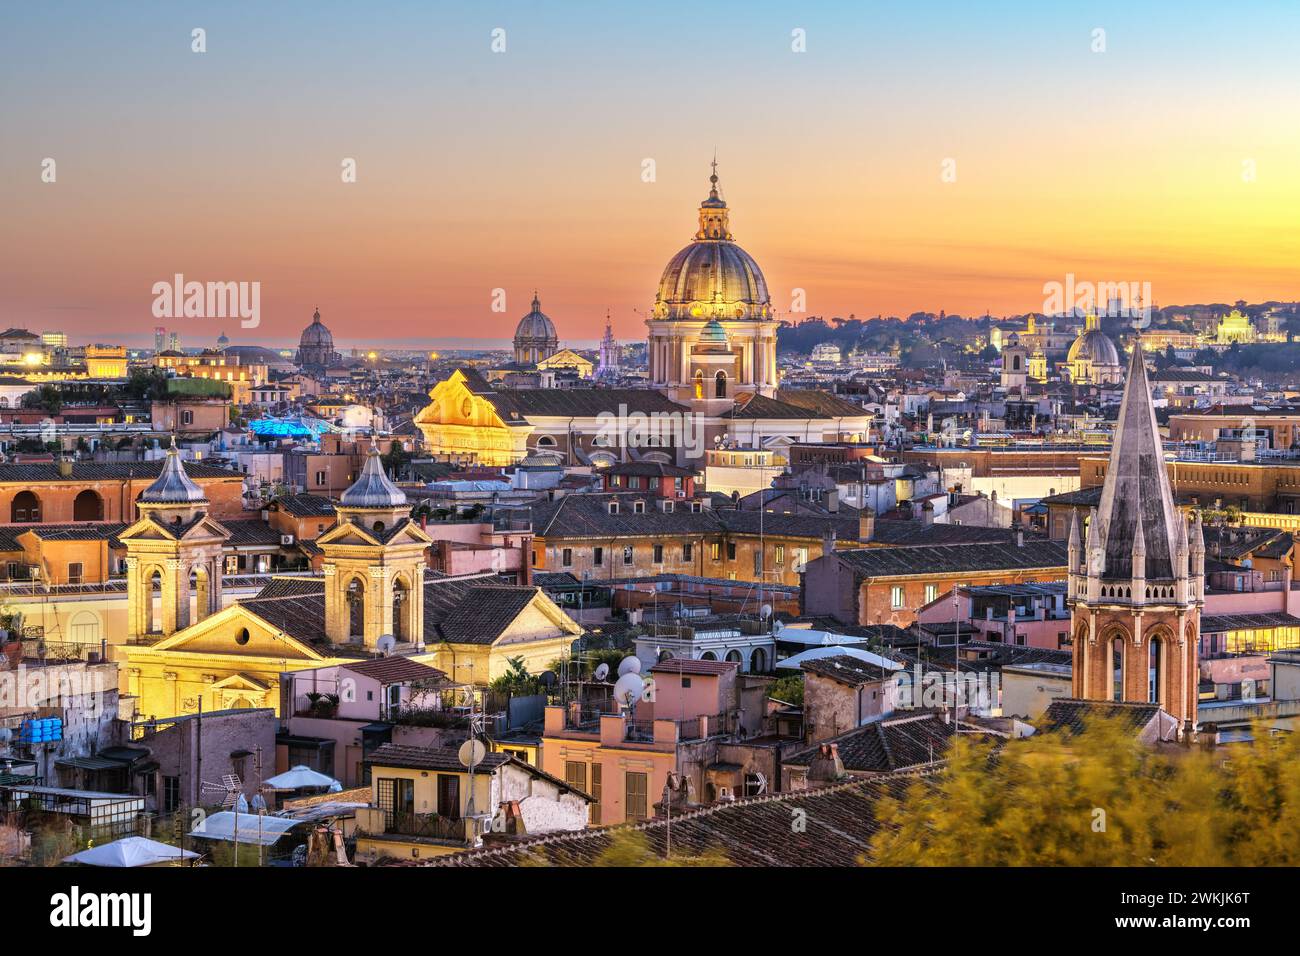 Rome, Italy cityscape with historic buildings and cathedrals at dusk. Stock Photo